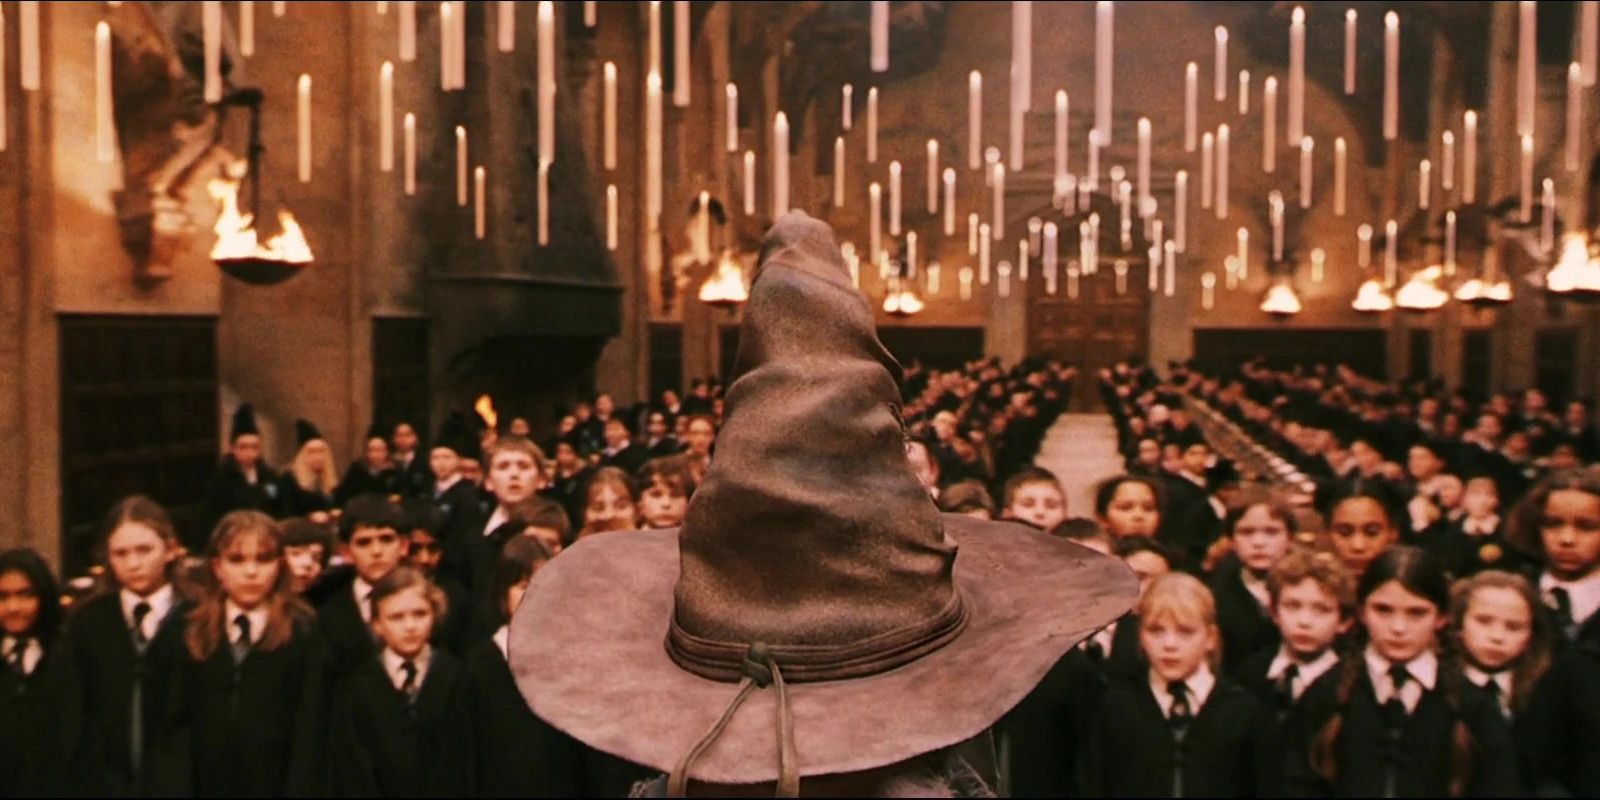 Hogwarts students being sorted into their Houses